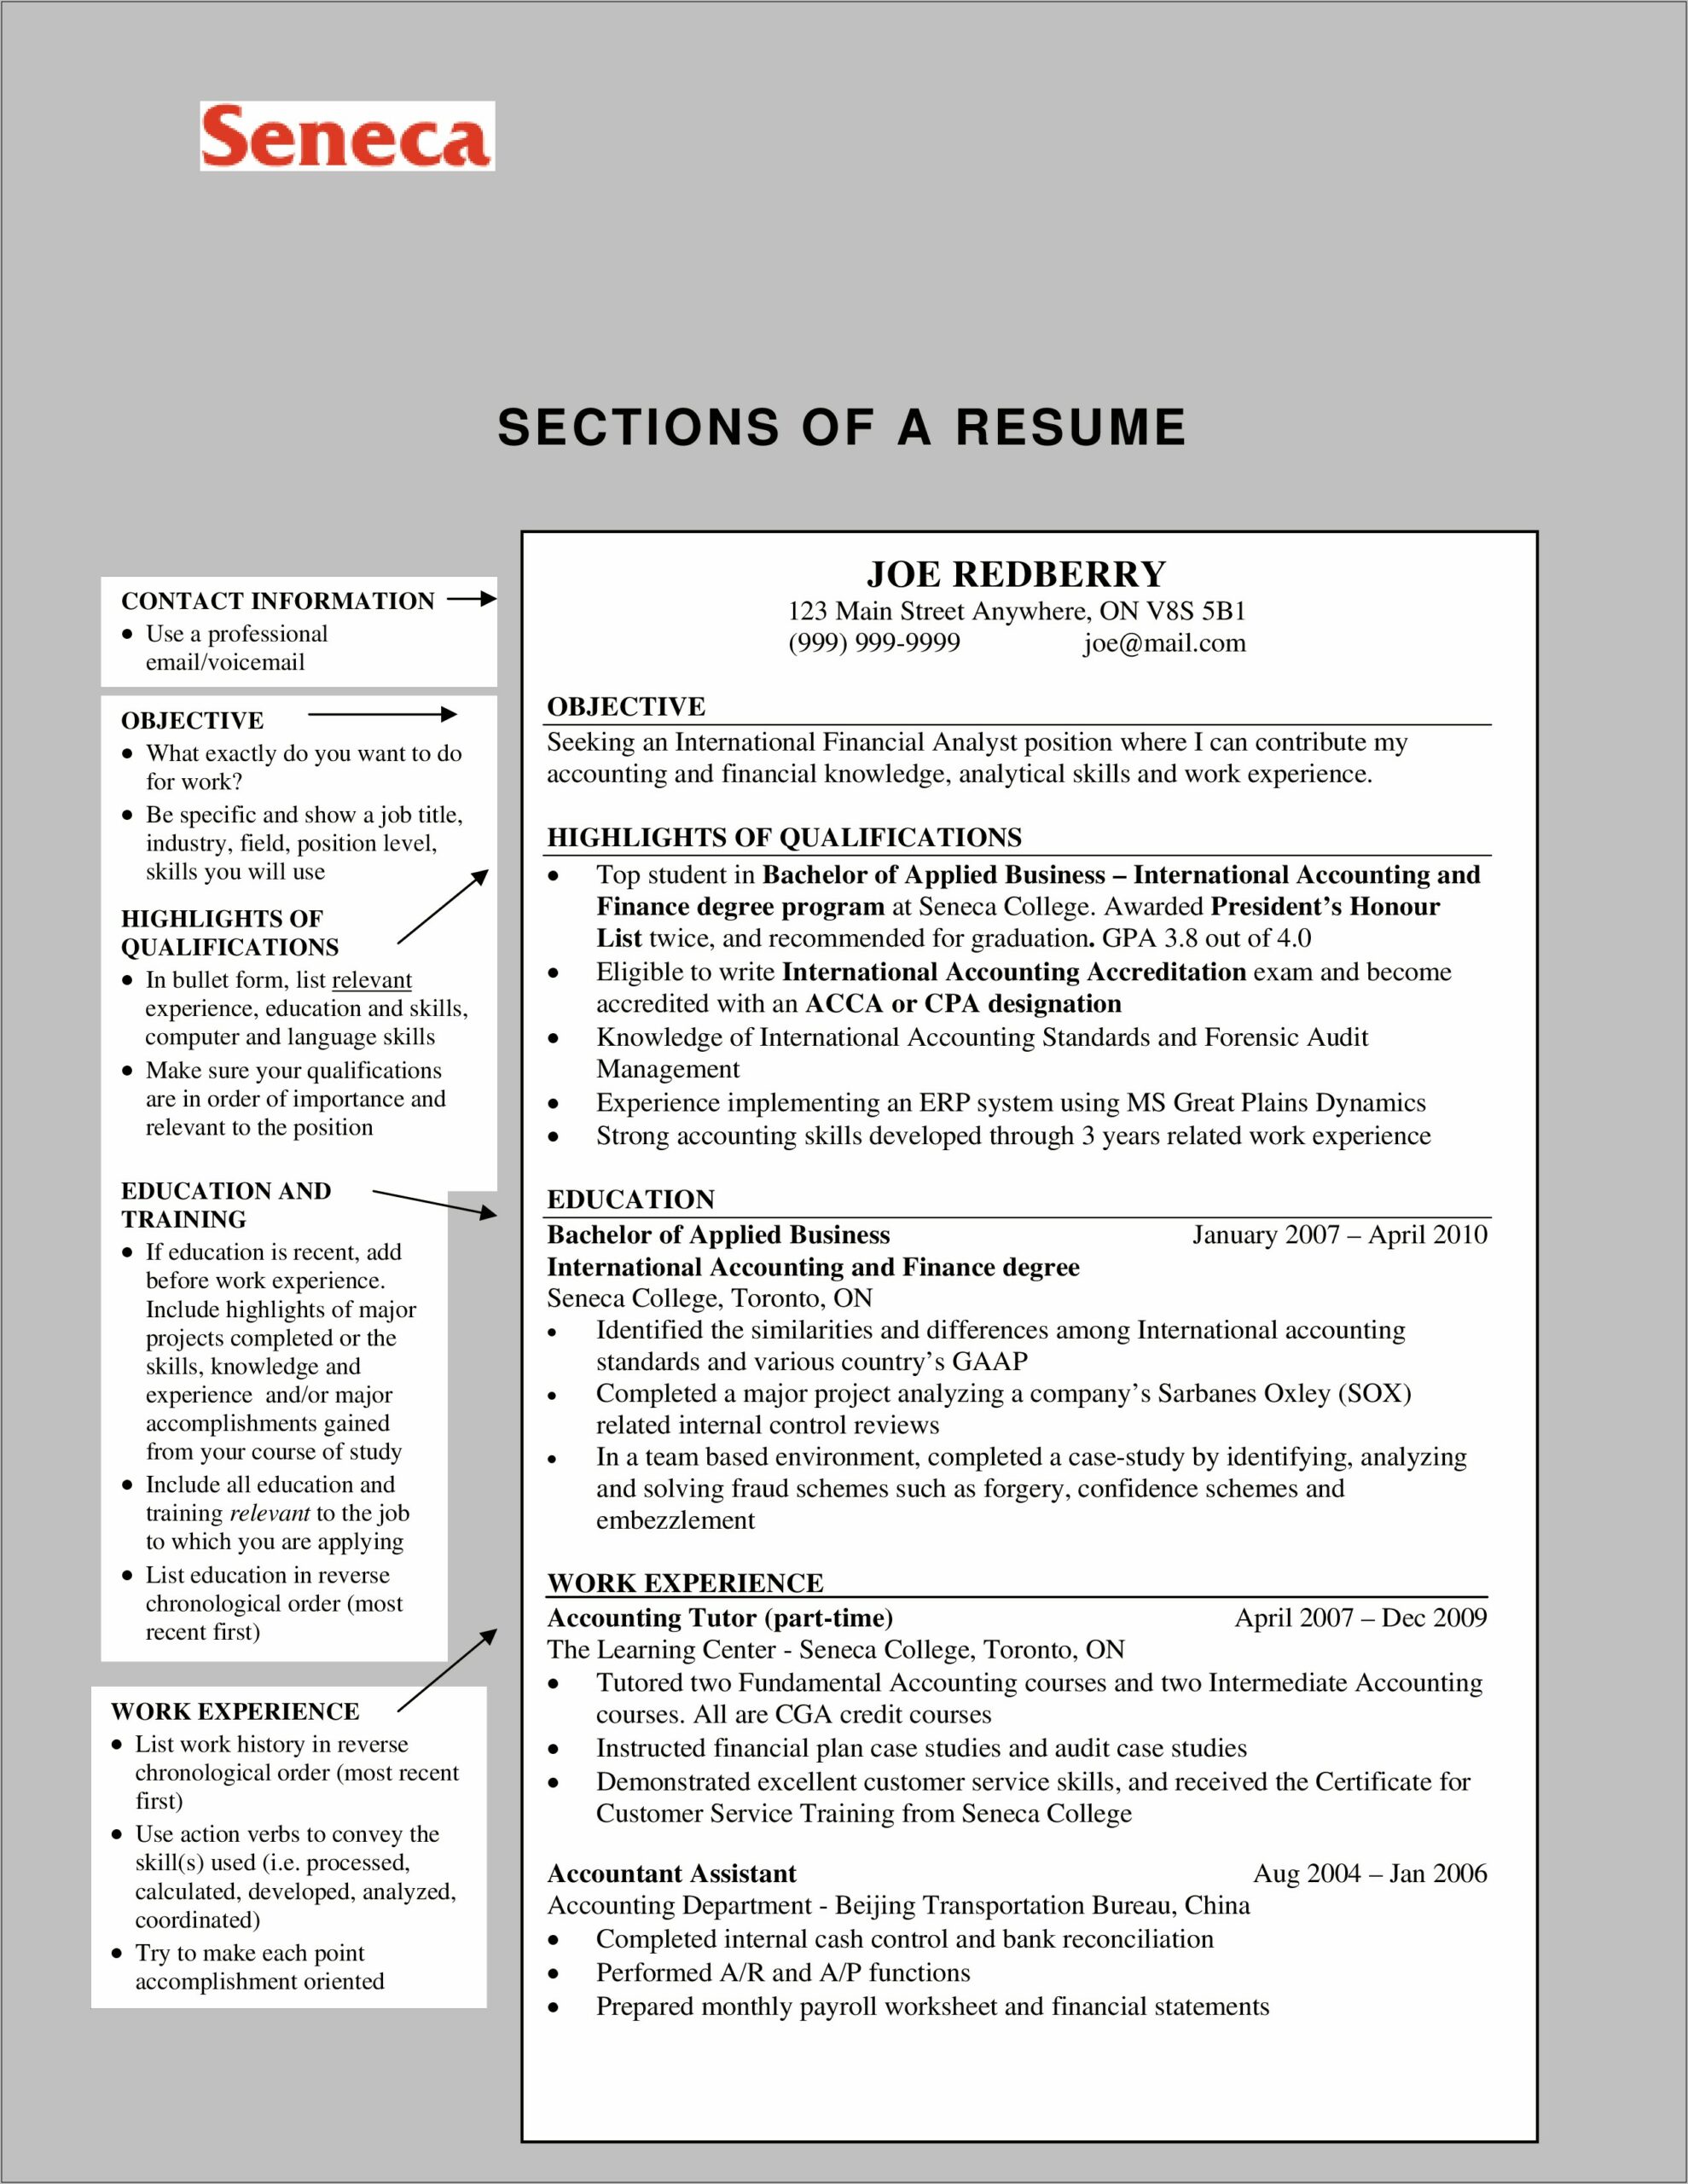 Resume To Work In Bank In Fraud Prevention